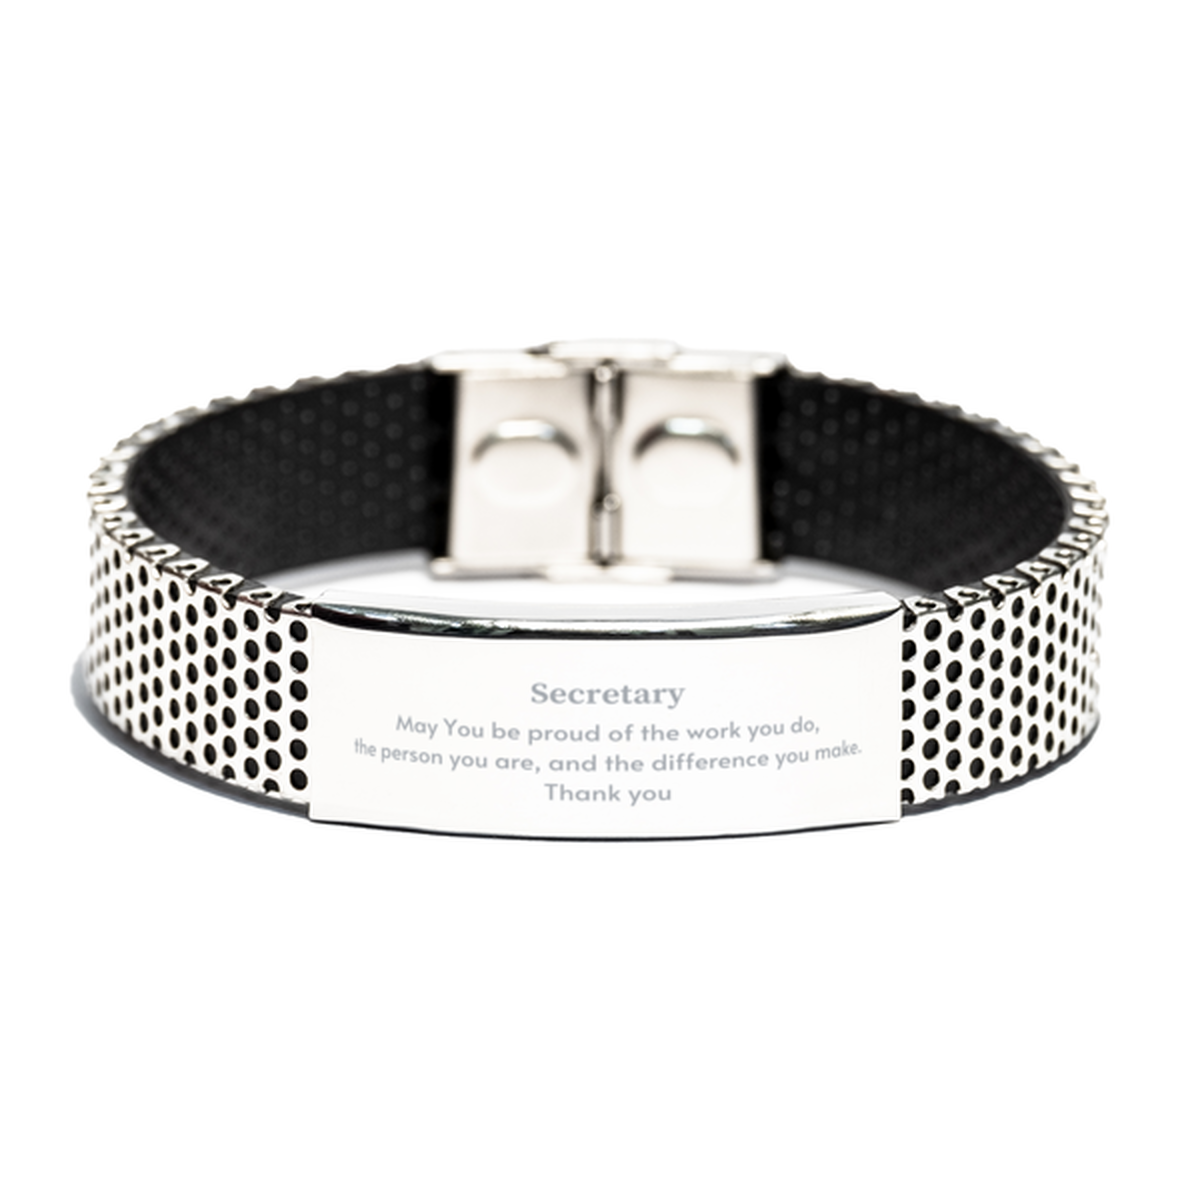 Heartwarming Stainless Steel Bracelet Retirement Coworkers Gifts for Secretary, Secretary May You be proud of the work you do, the person you are Gifts for Boss Men Women Friends